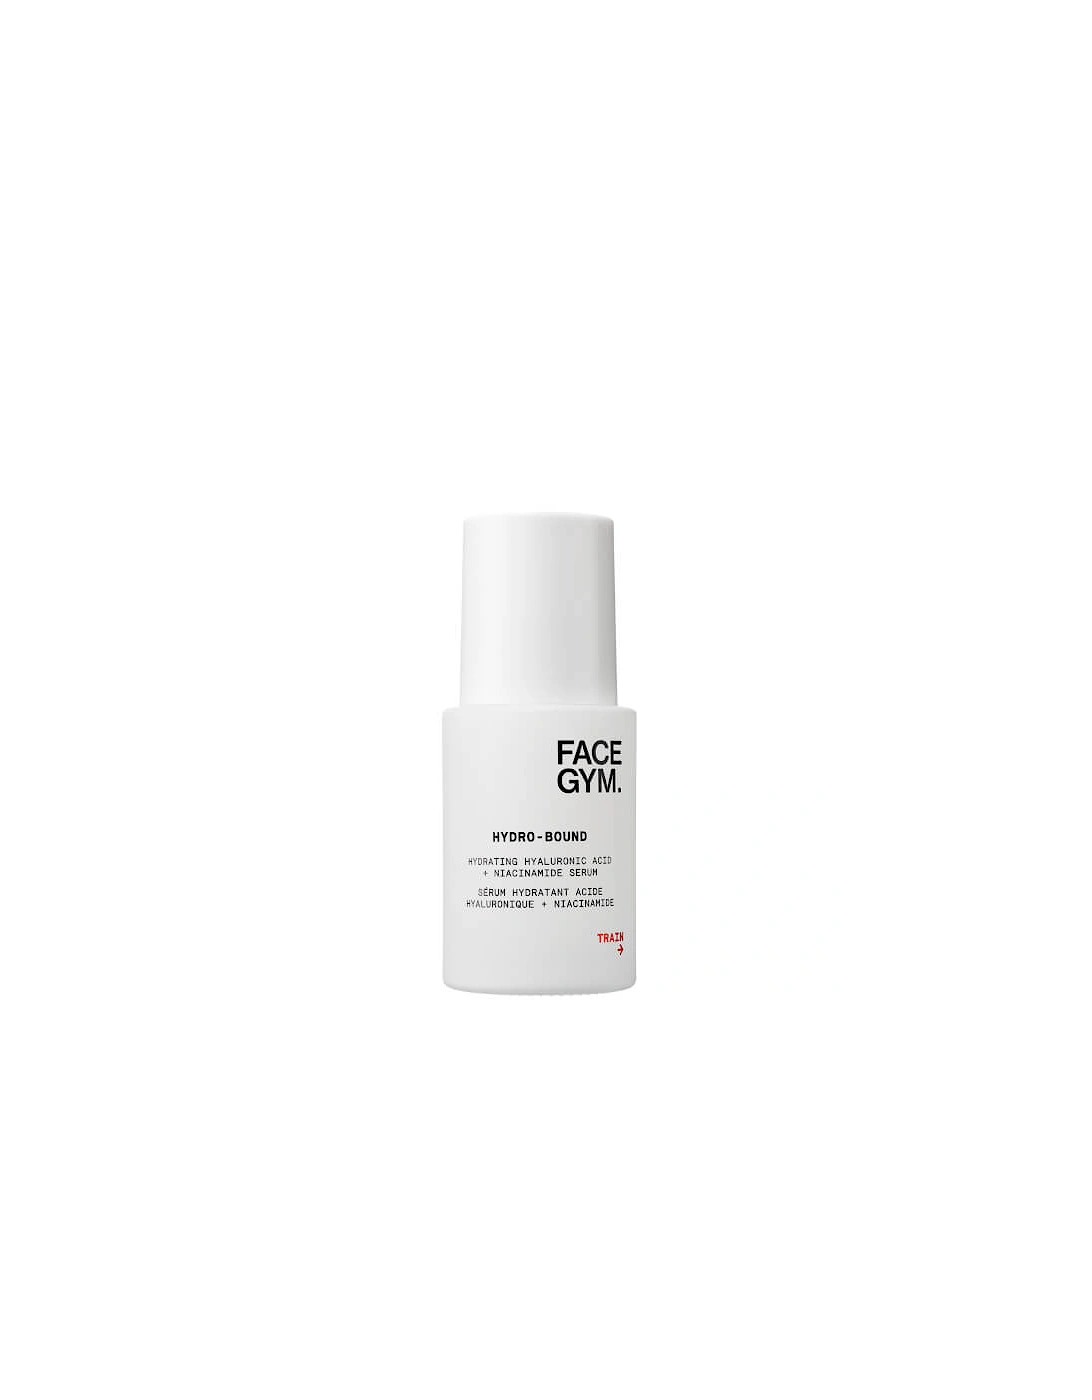 Hydro-Bound Hydrating Hyaluronic Acid and Niacinamide Serum 30ml - - Hydro-Bound Hydrating Hyaluronic Acid and Niacinamide Serum 30ml - Hydro-bound Hydrating Hyaluronic Acid and Niacinamide Serum 15ml, 2 of 1